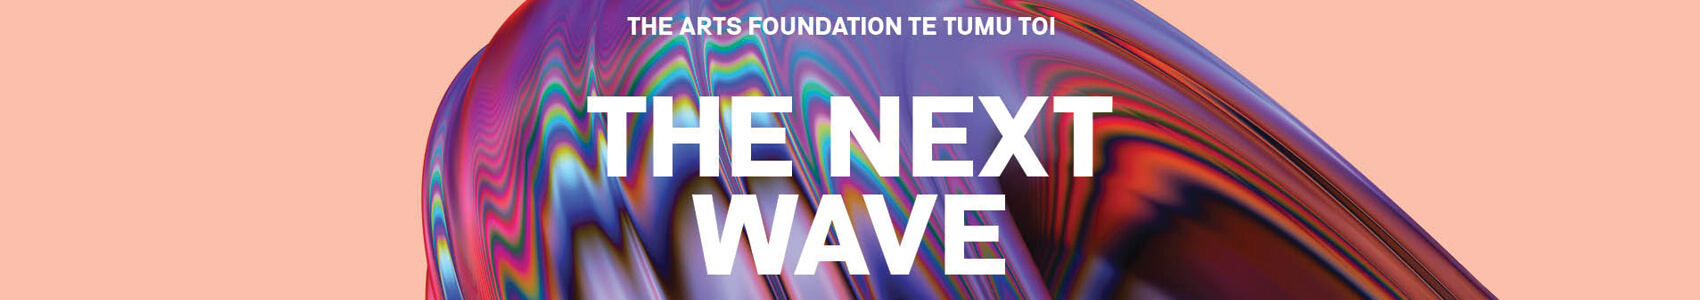 Meet the Next Wave of Artists Shaping Aotearoa: The Arts Foundation Te Tumu Toi Laureate Party